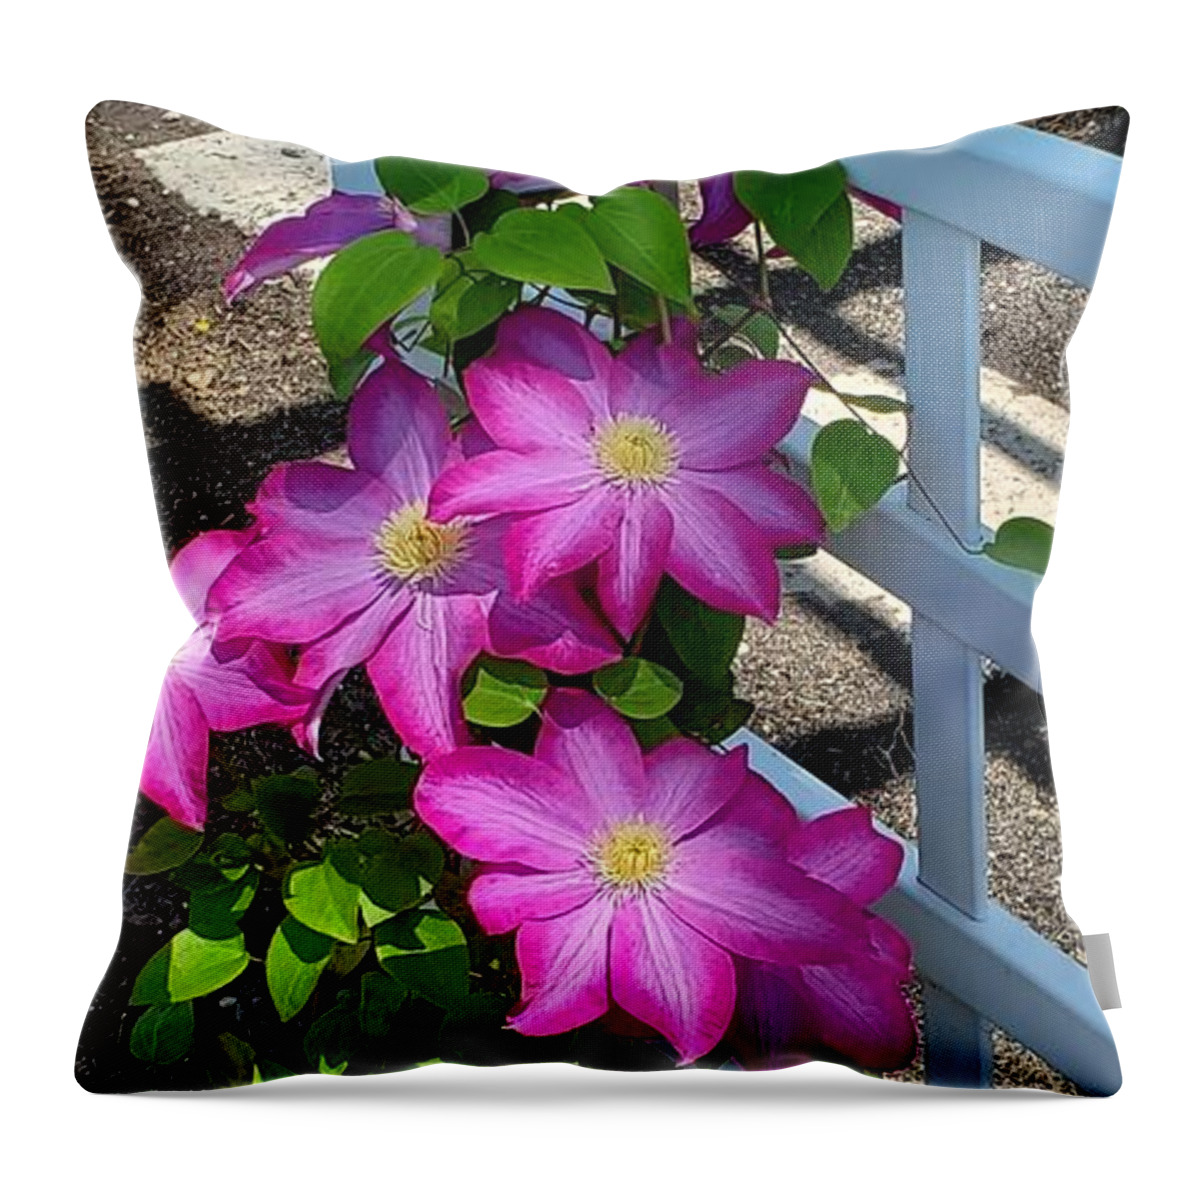 Clematis Flower Throw Pillow featuring the photograph Pink Champagne Clematis by Stacie Siemsen